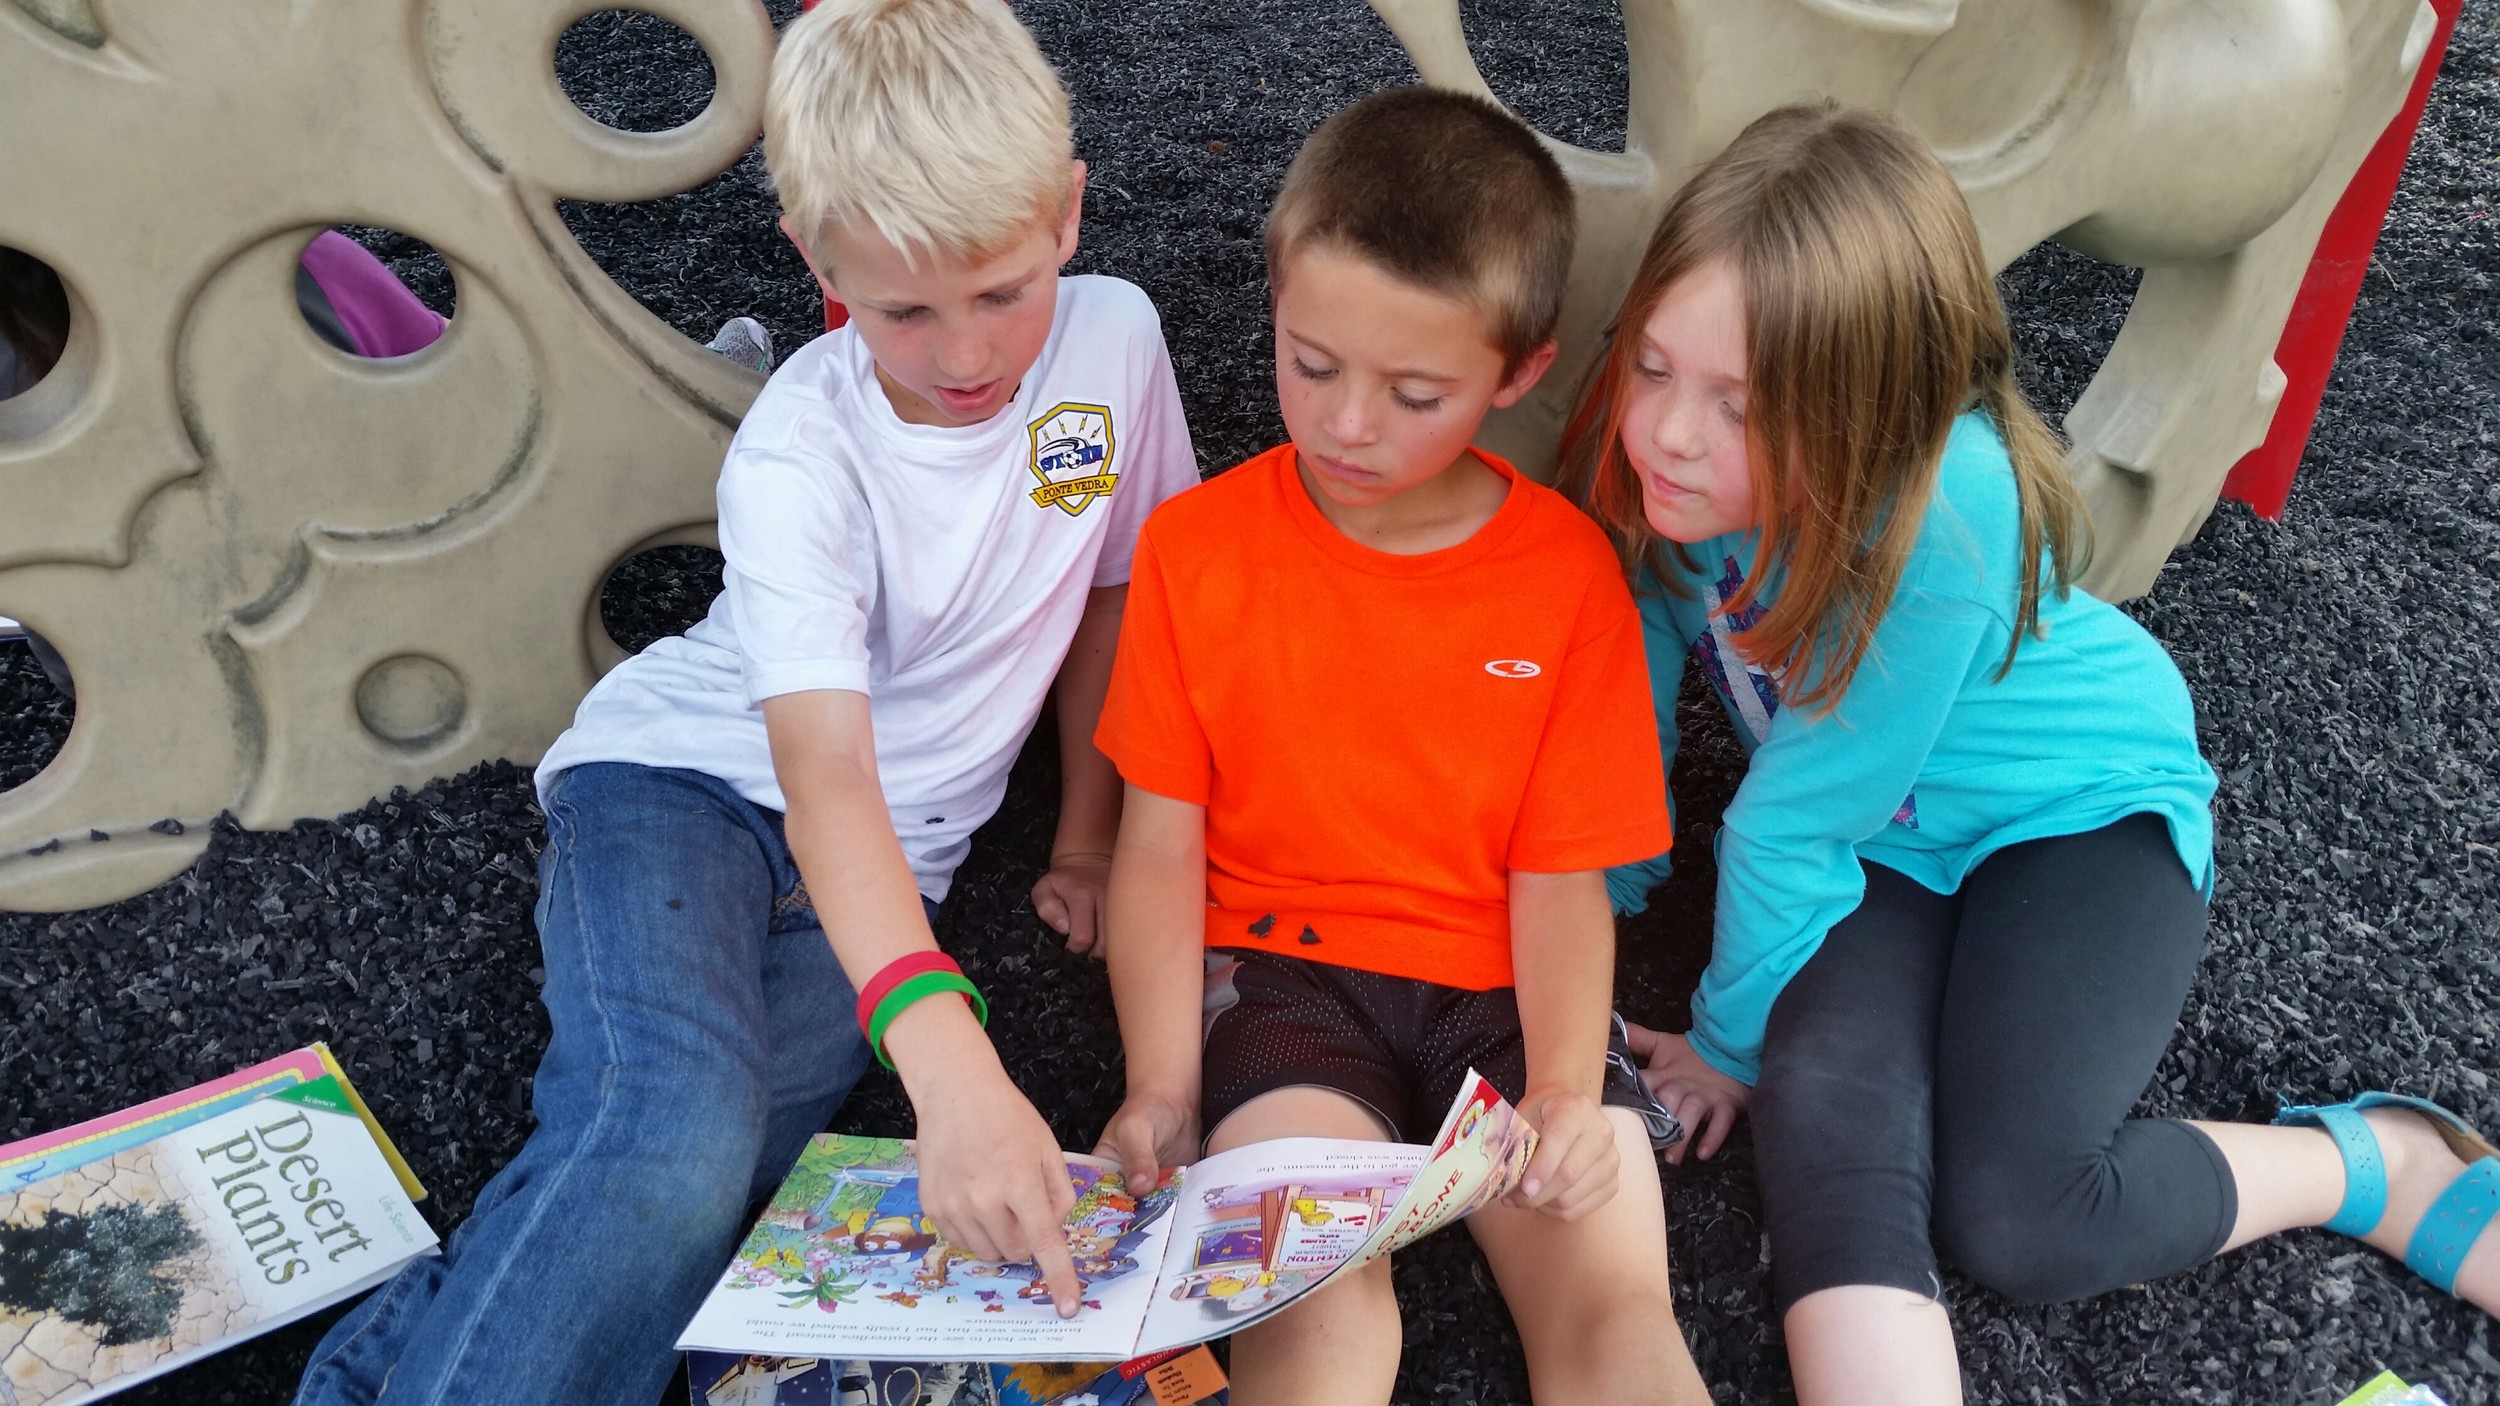 Second grade students Levi Usry and Brody Kaul enjoy reading with first grade student Lyla Peters through the “Reading Buddies” partnership between Mrs. McCall’s and Mrs. Gregg’s classes.